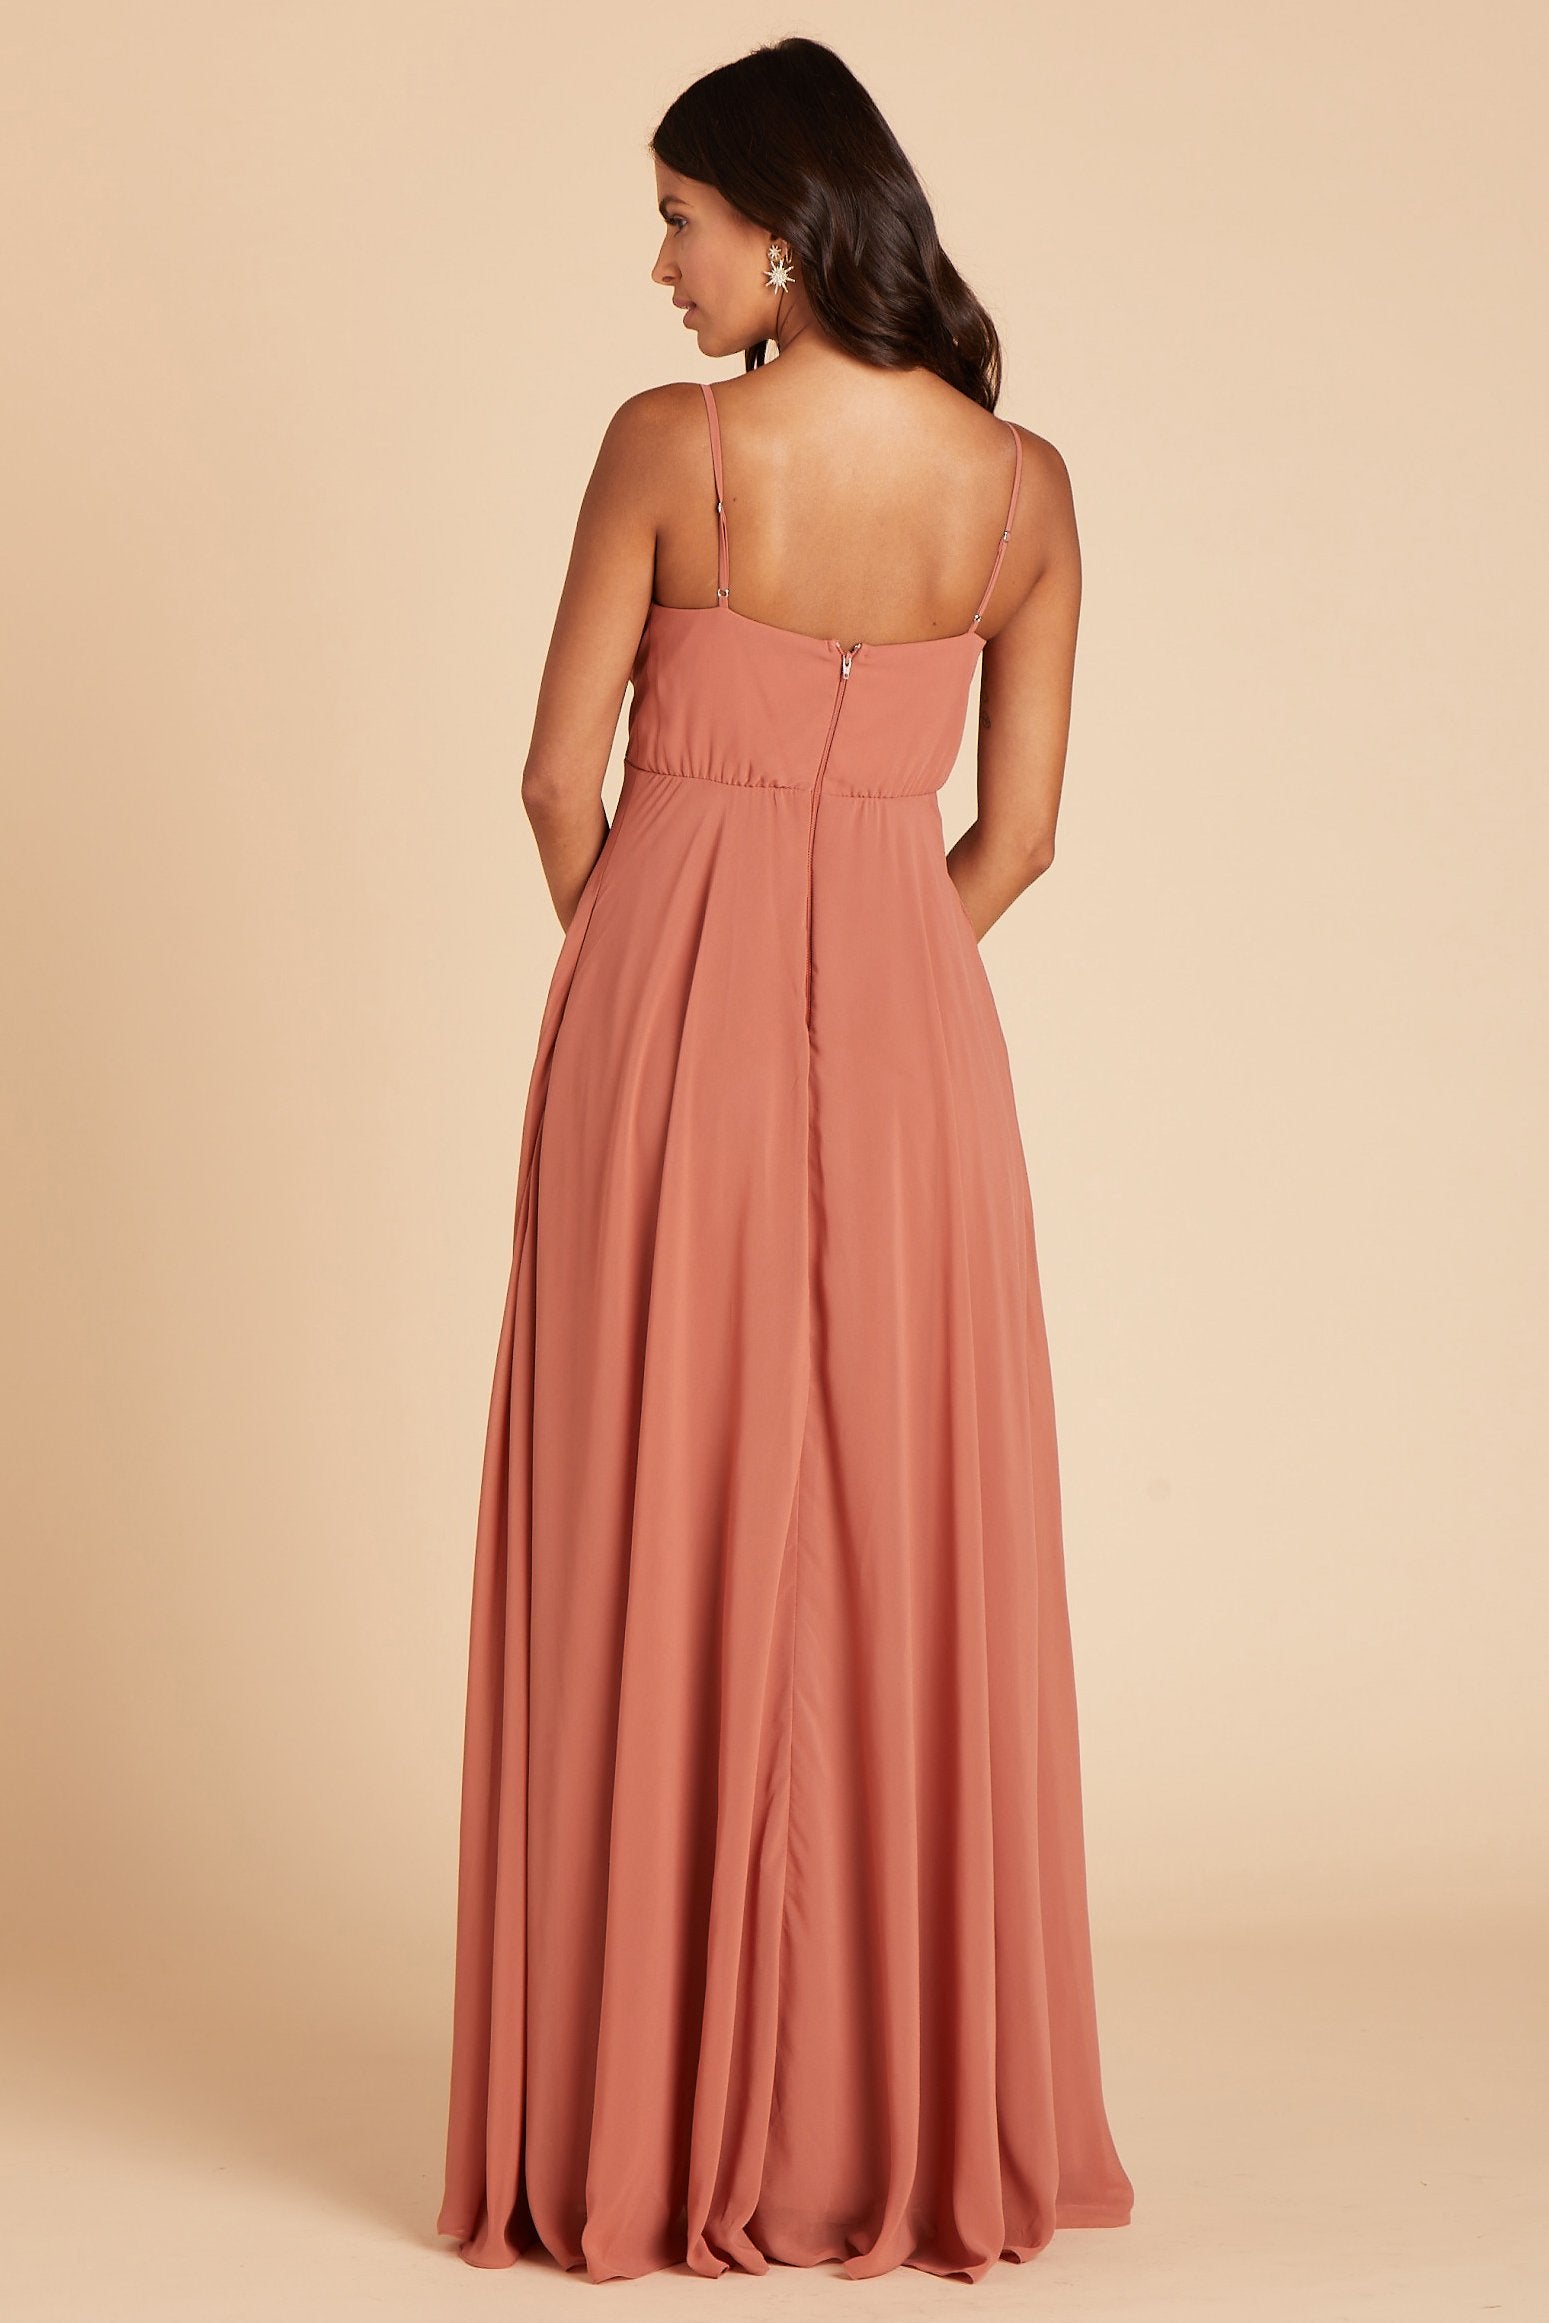 Back view of the Kaia Dress in terracotta chiffon shows the hook and eye closure and the zipper in the center seam of the dress bodice and skirt. 